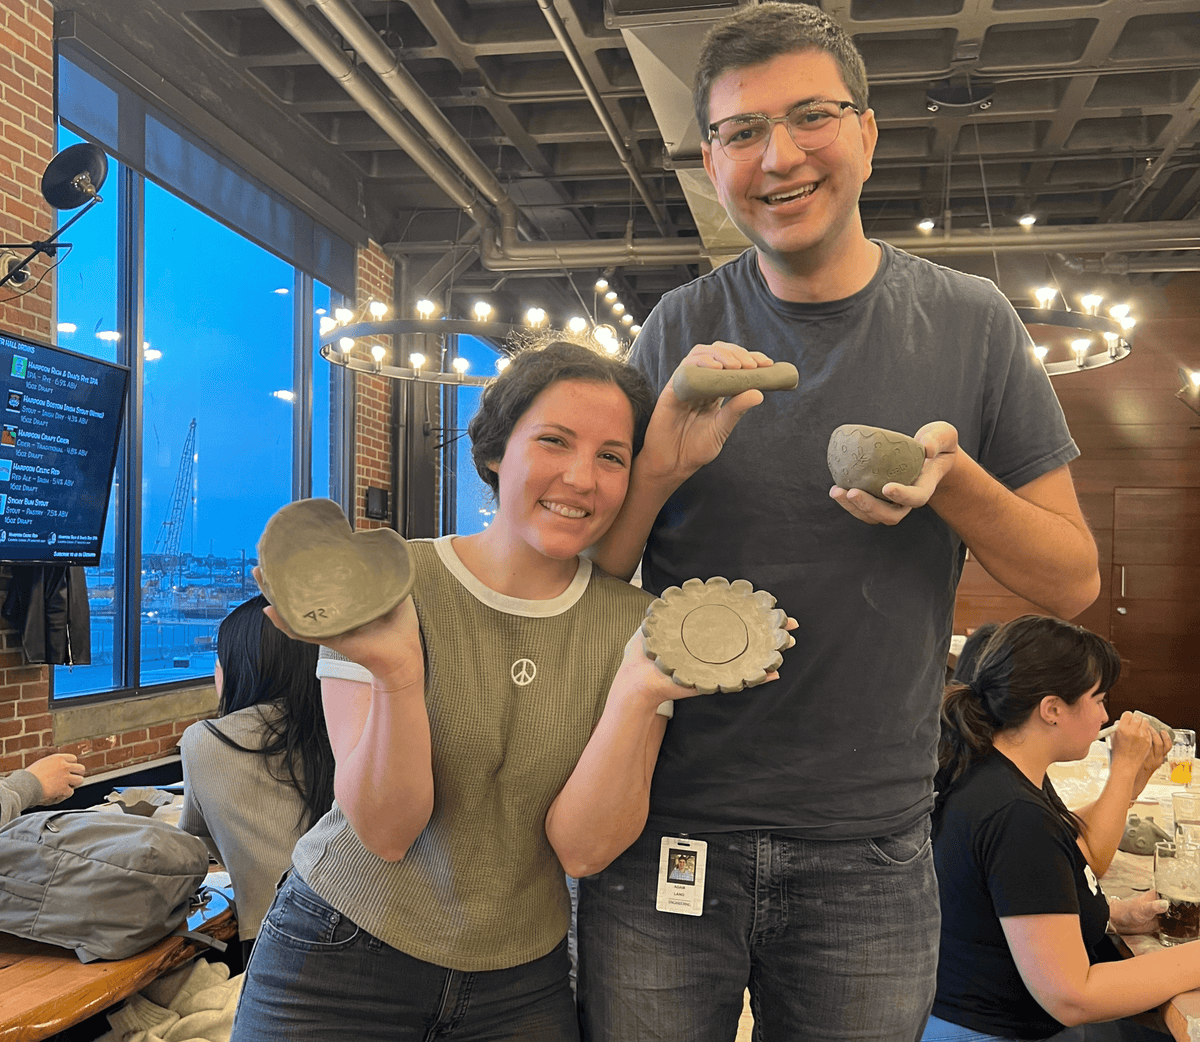 Pottery Class: Clay Date Night — 1/11 (Canton MA)